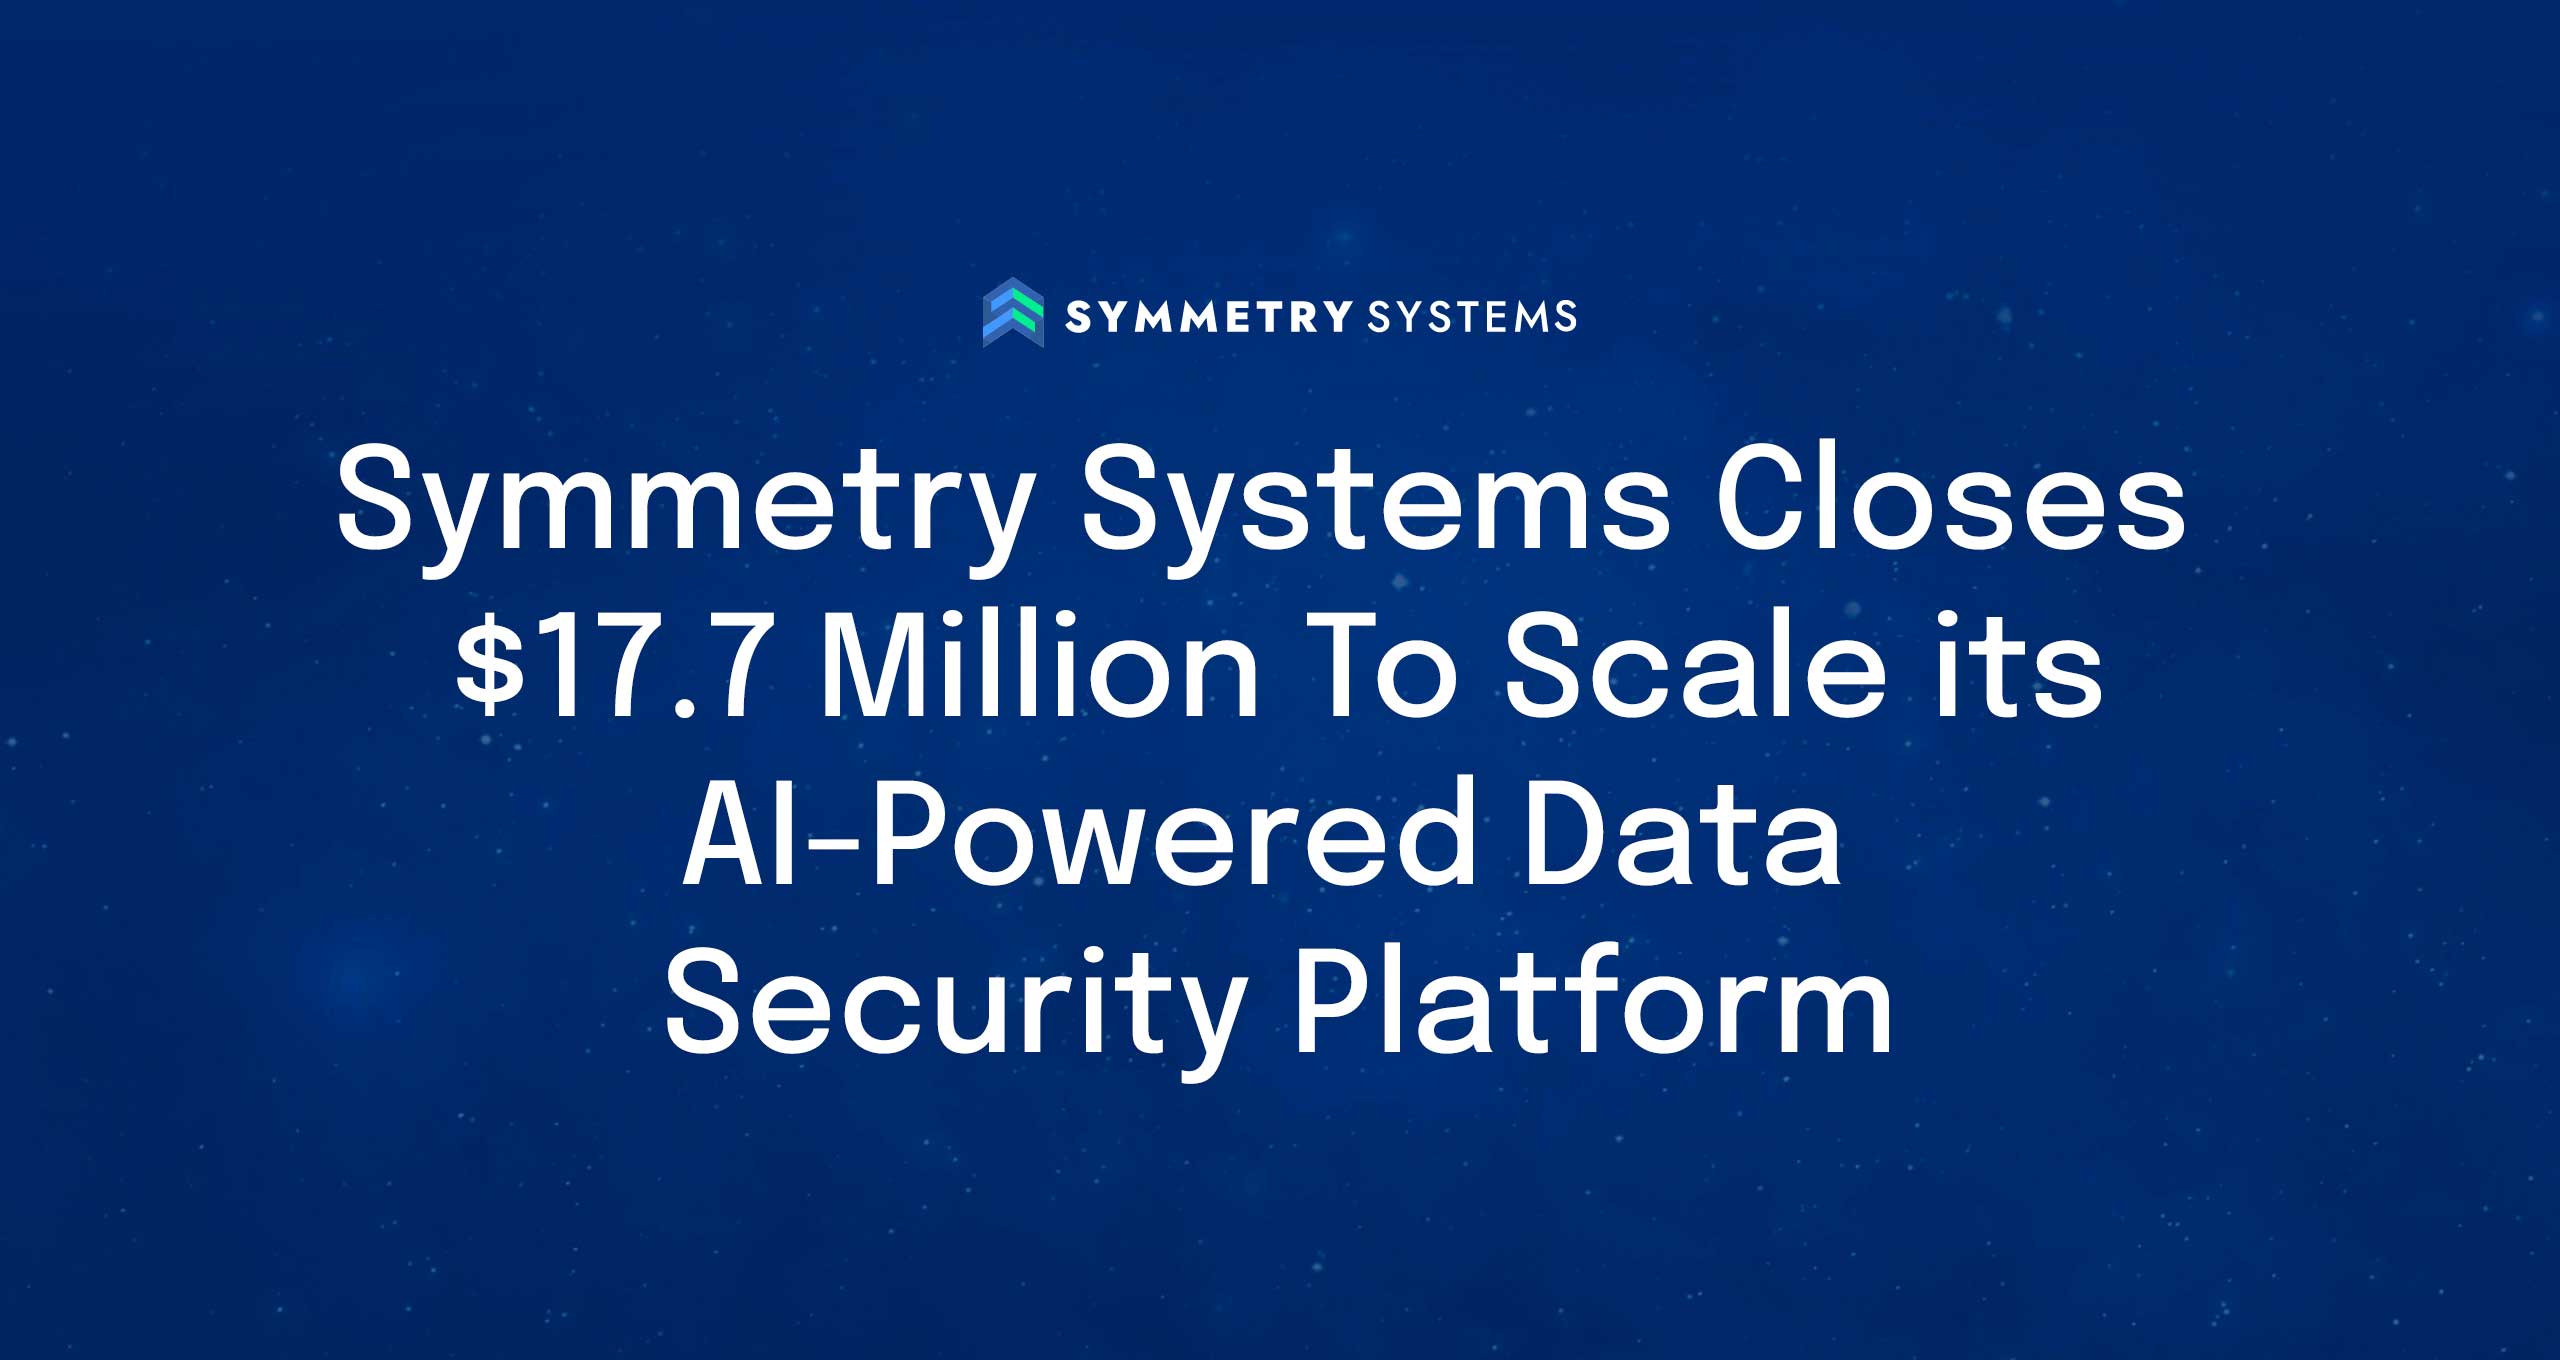 symmetry-systems-closes-17-7-million-to-scale-its-ai-powered-data-security-platform